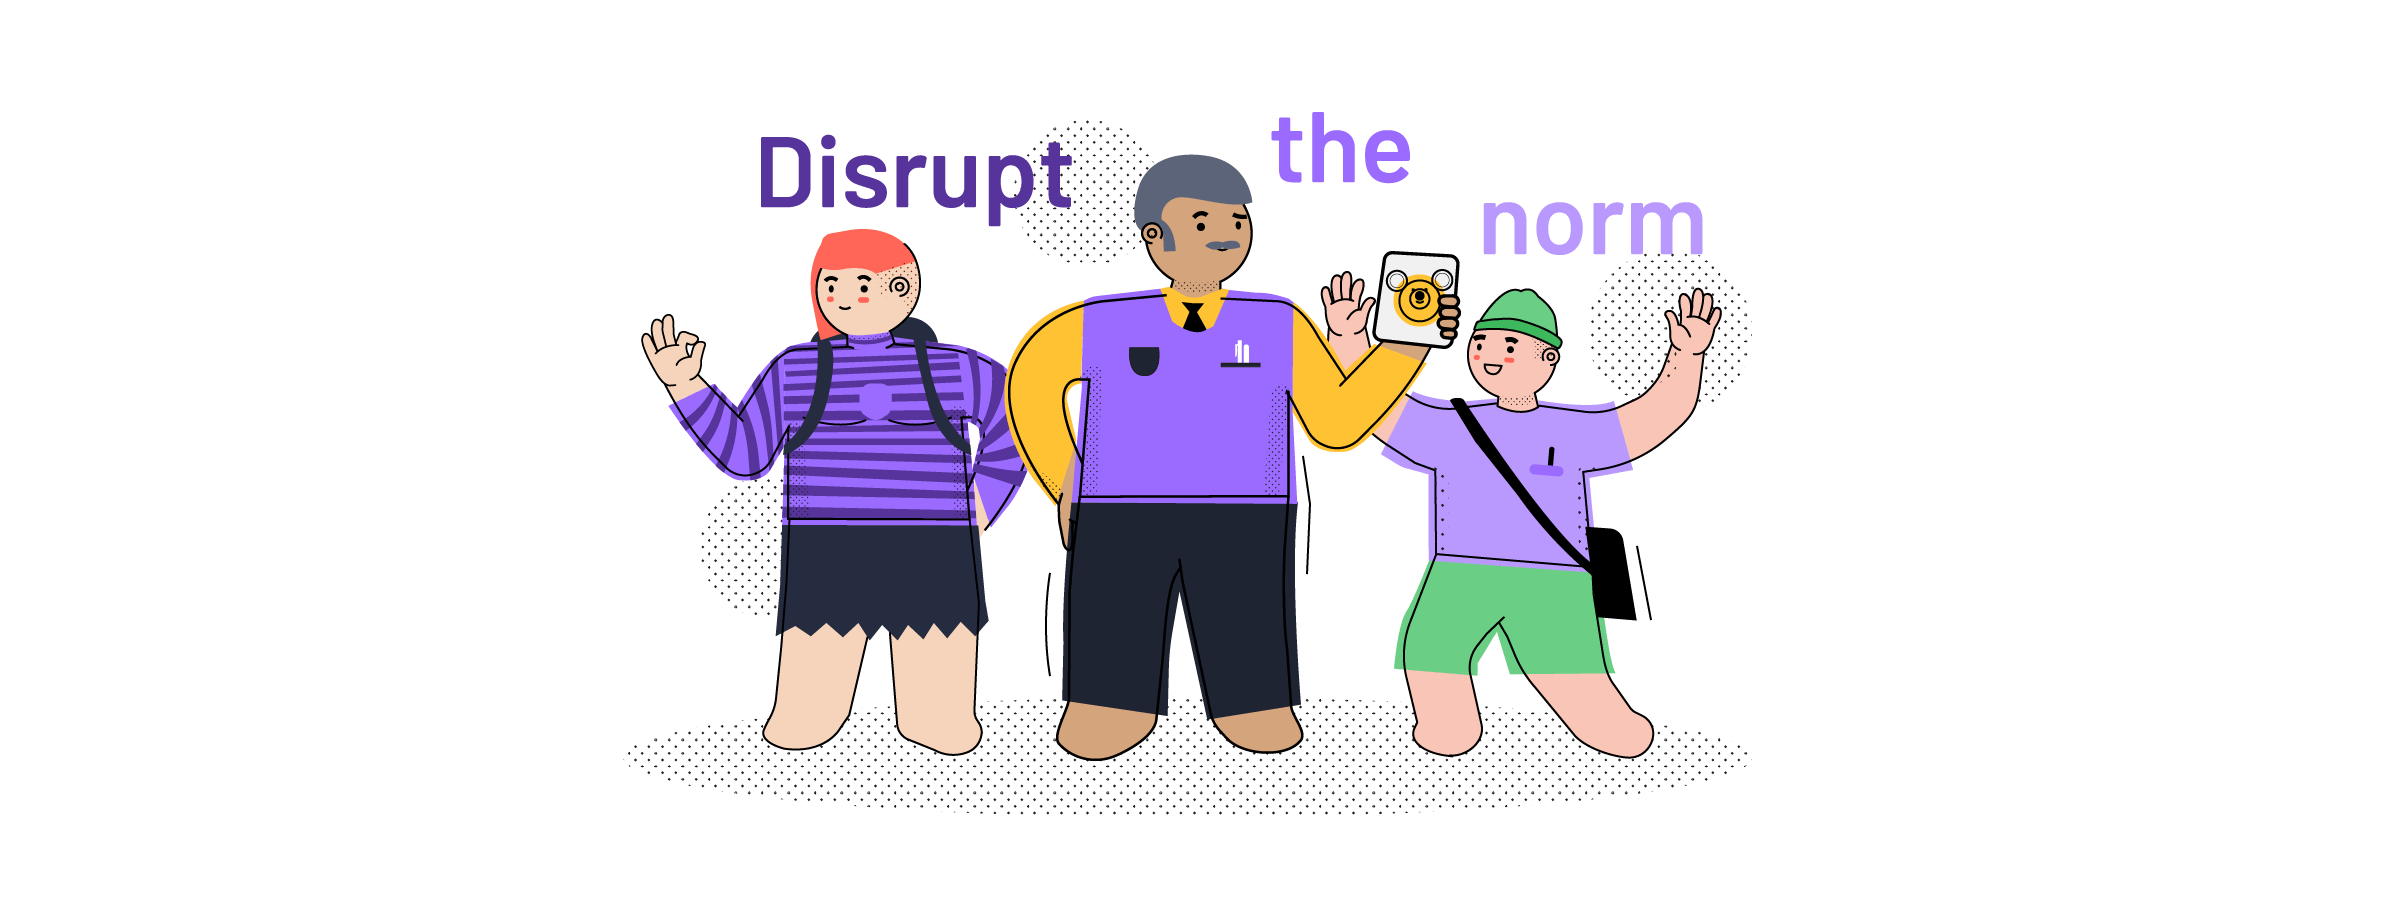 Illustration of a teacher with kids and DISRUPT THE NORM text, related to edtech companies